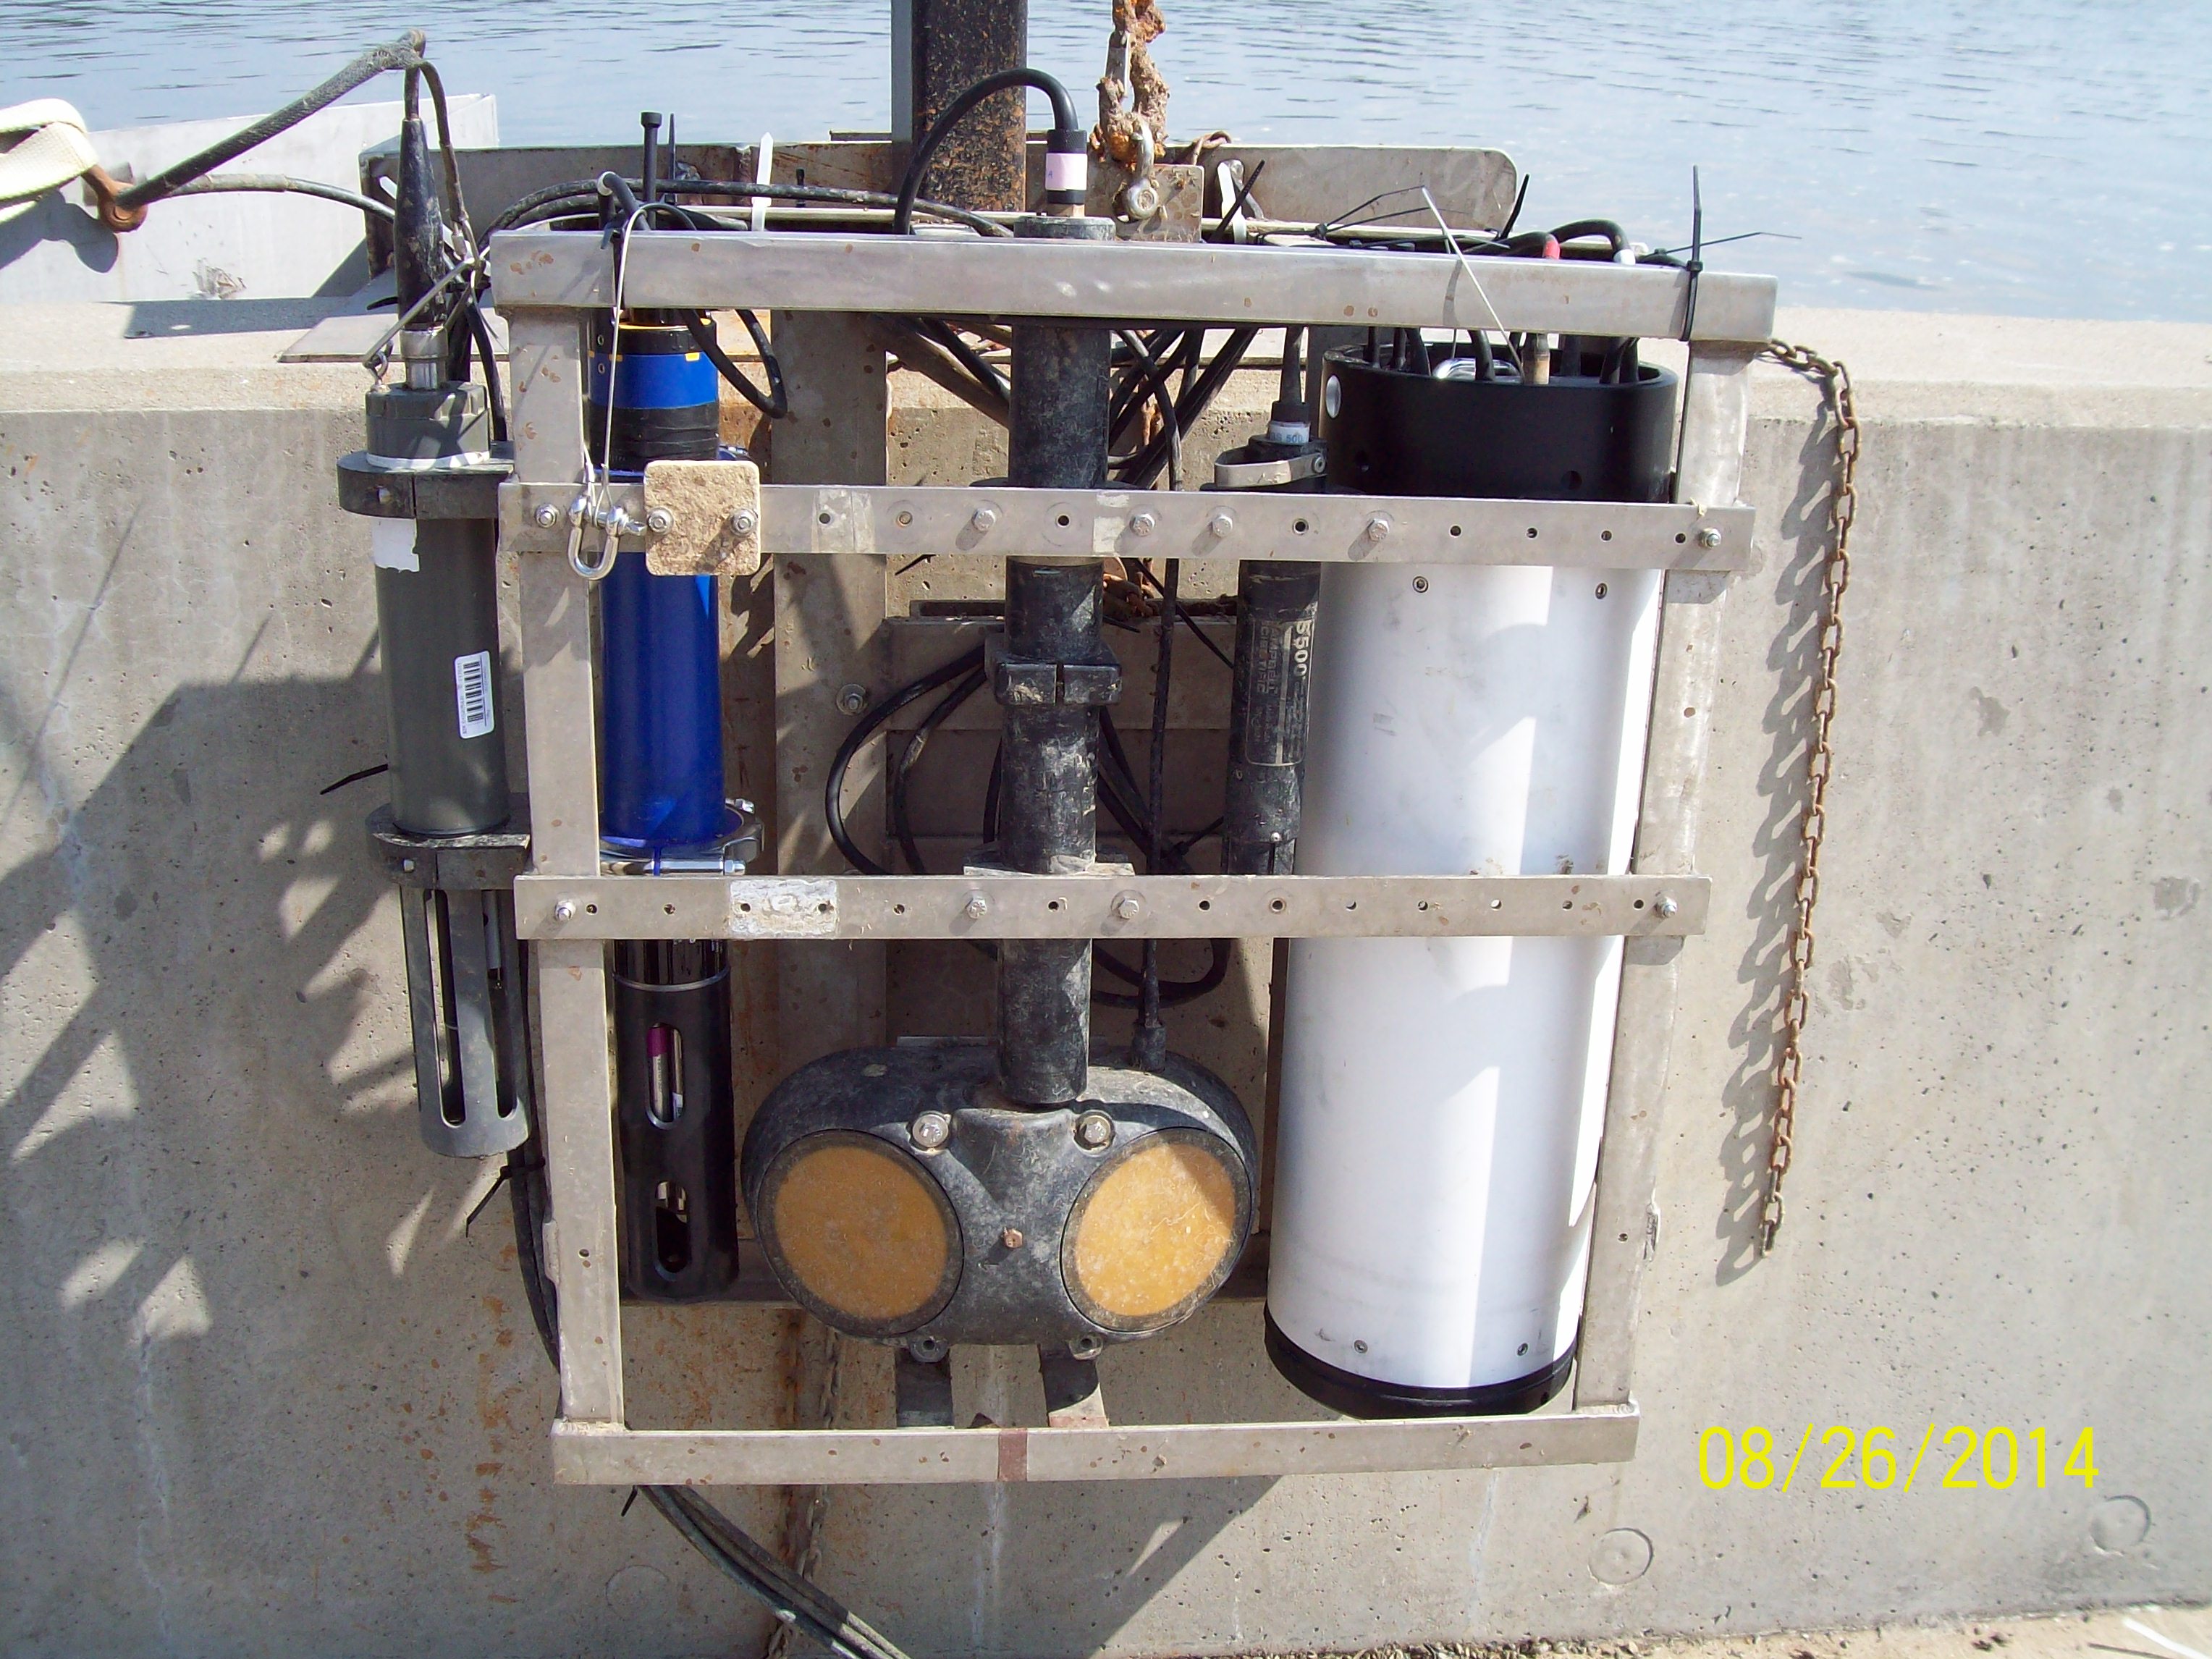 [Photograph of water-quality monitoring equipment]